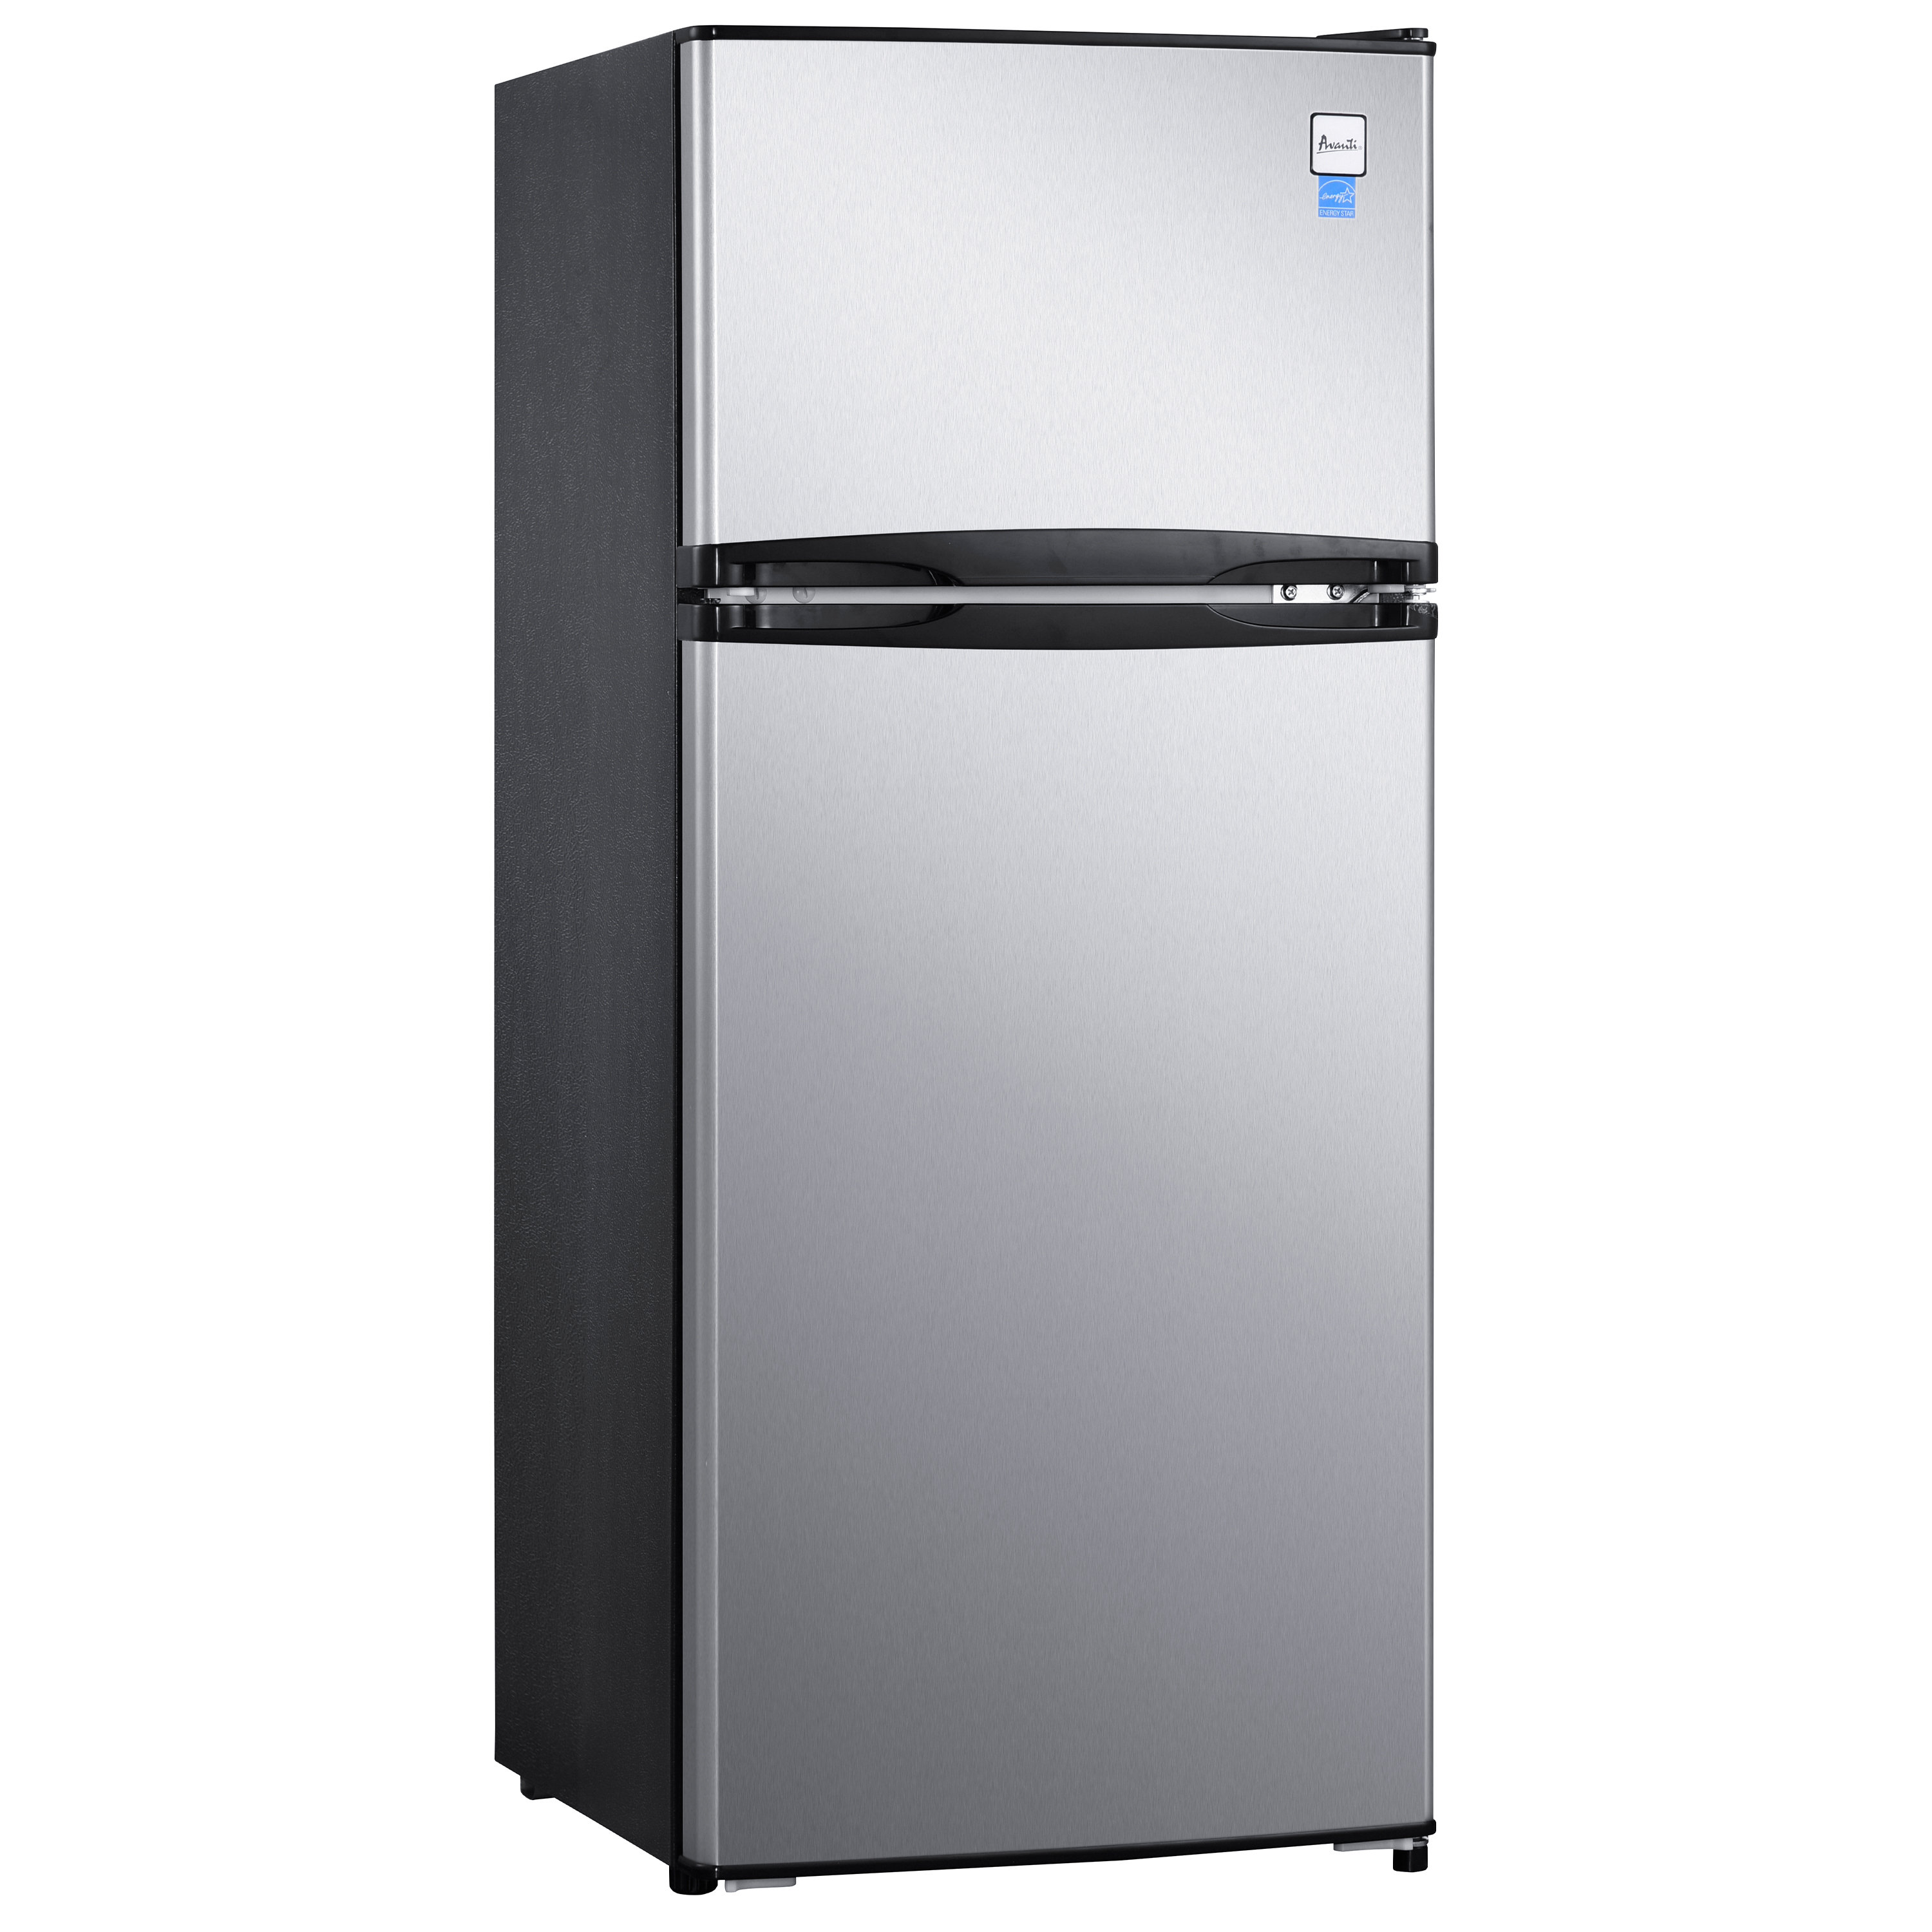 R.W.FLAME Double Door 3.2 Cubic Feet cu. ft. Compact Refrigerator